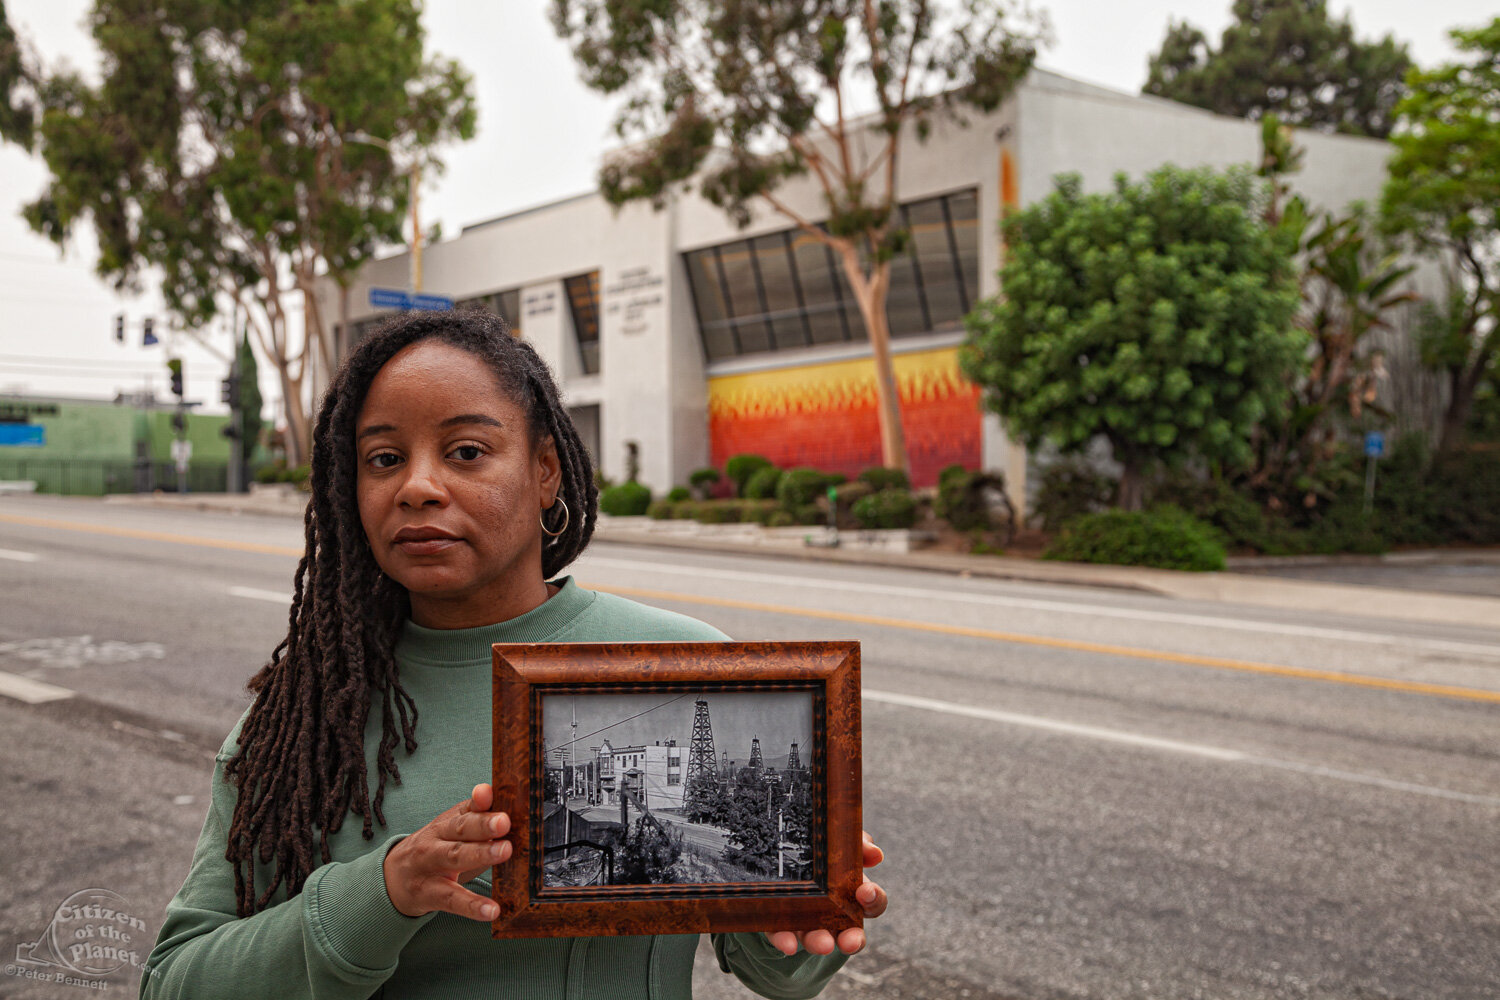  Resident, Mercedes Yolanda Cooper holds a 1905 photo of the intersection of W. 1st Street and Belmont Ave. Today, though not visible, the oil wells lie shallowly below the ground.  